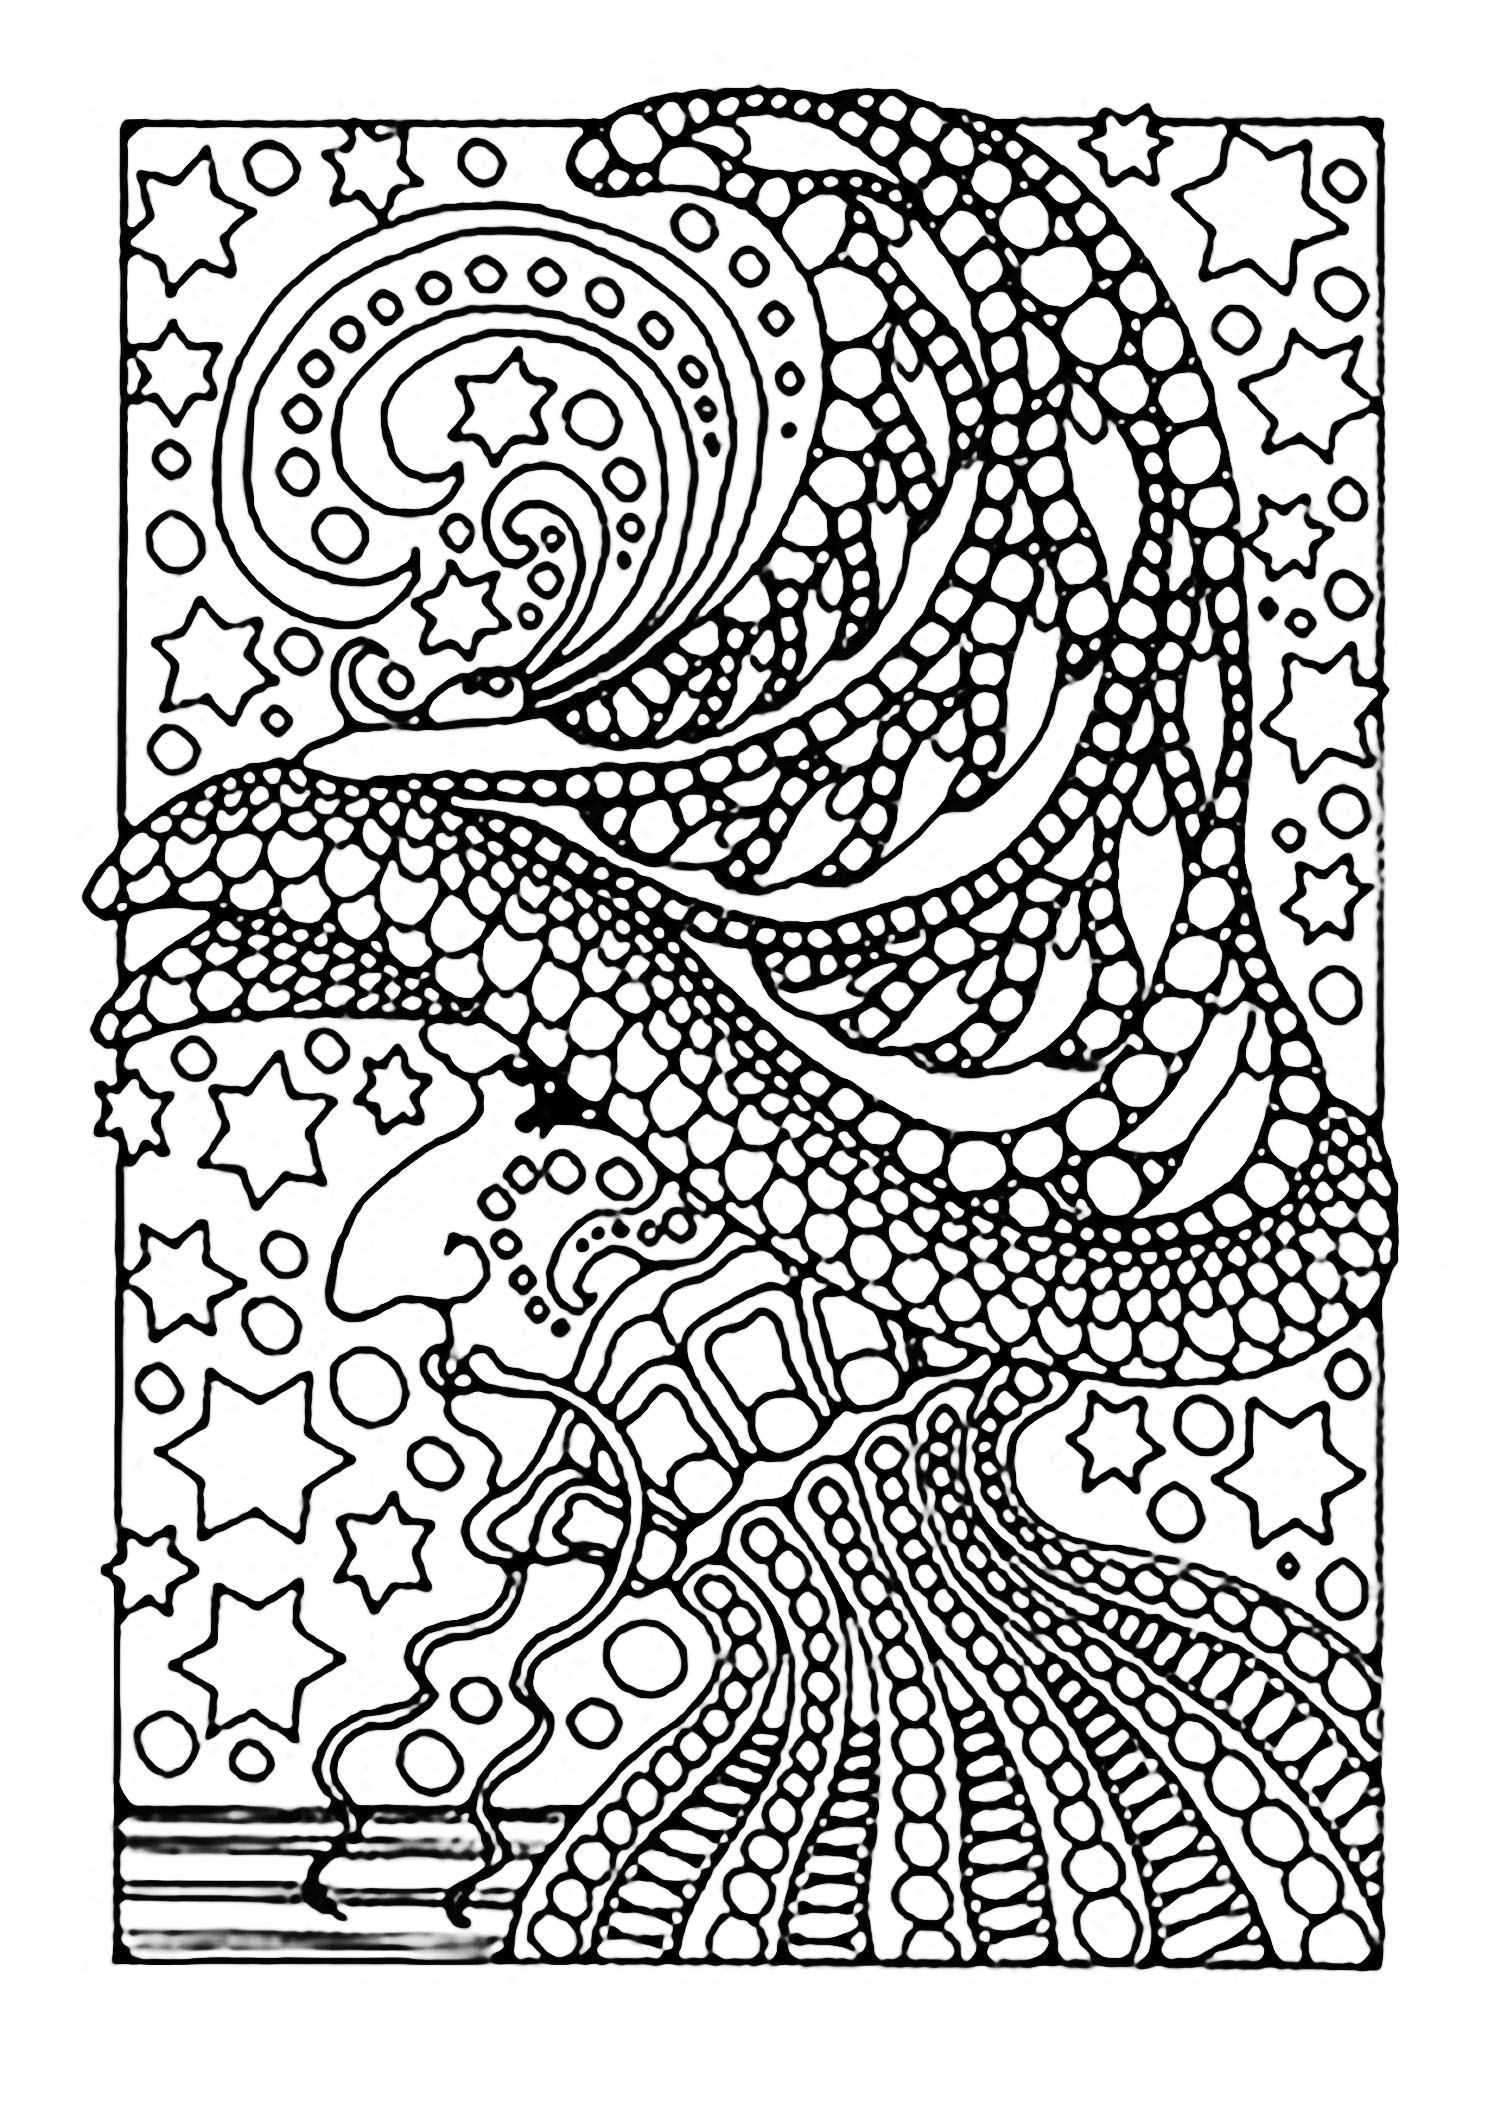 Animal Cell Worksheet together with New 15 Inspirational Animal Cell Coloring Page Image – Coloring